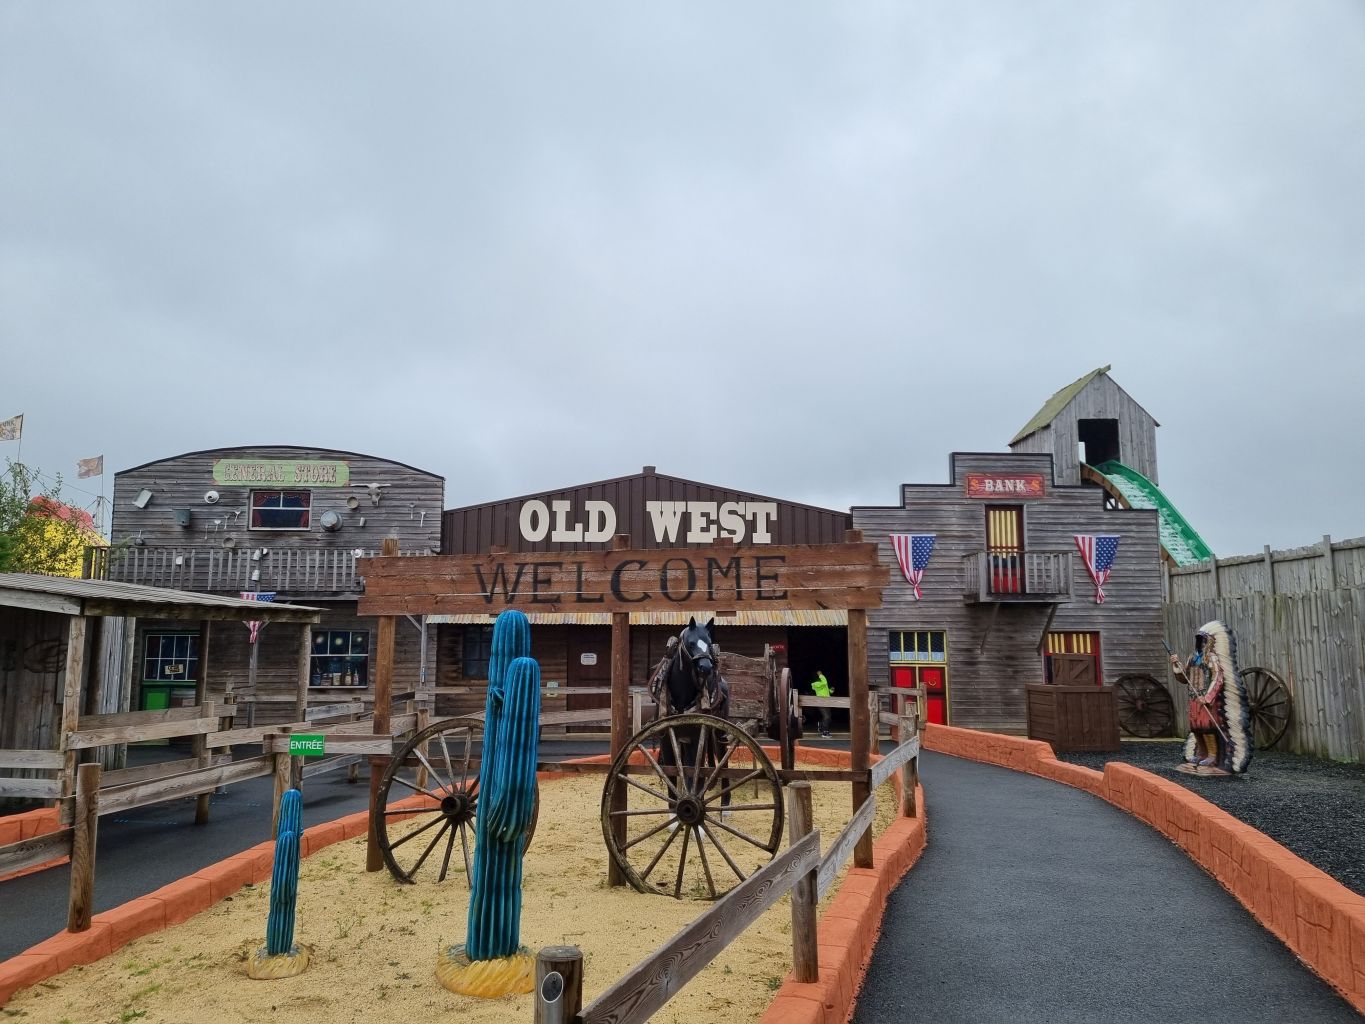 Old West Shooting